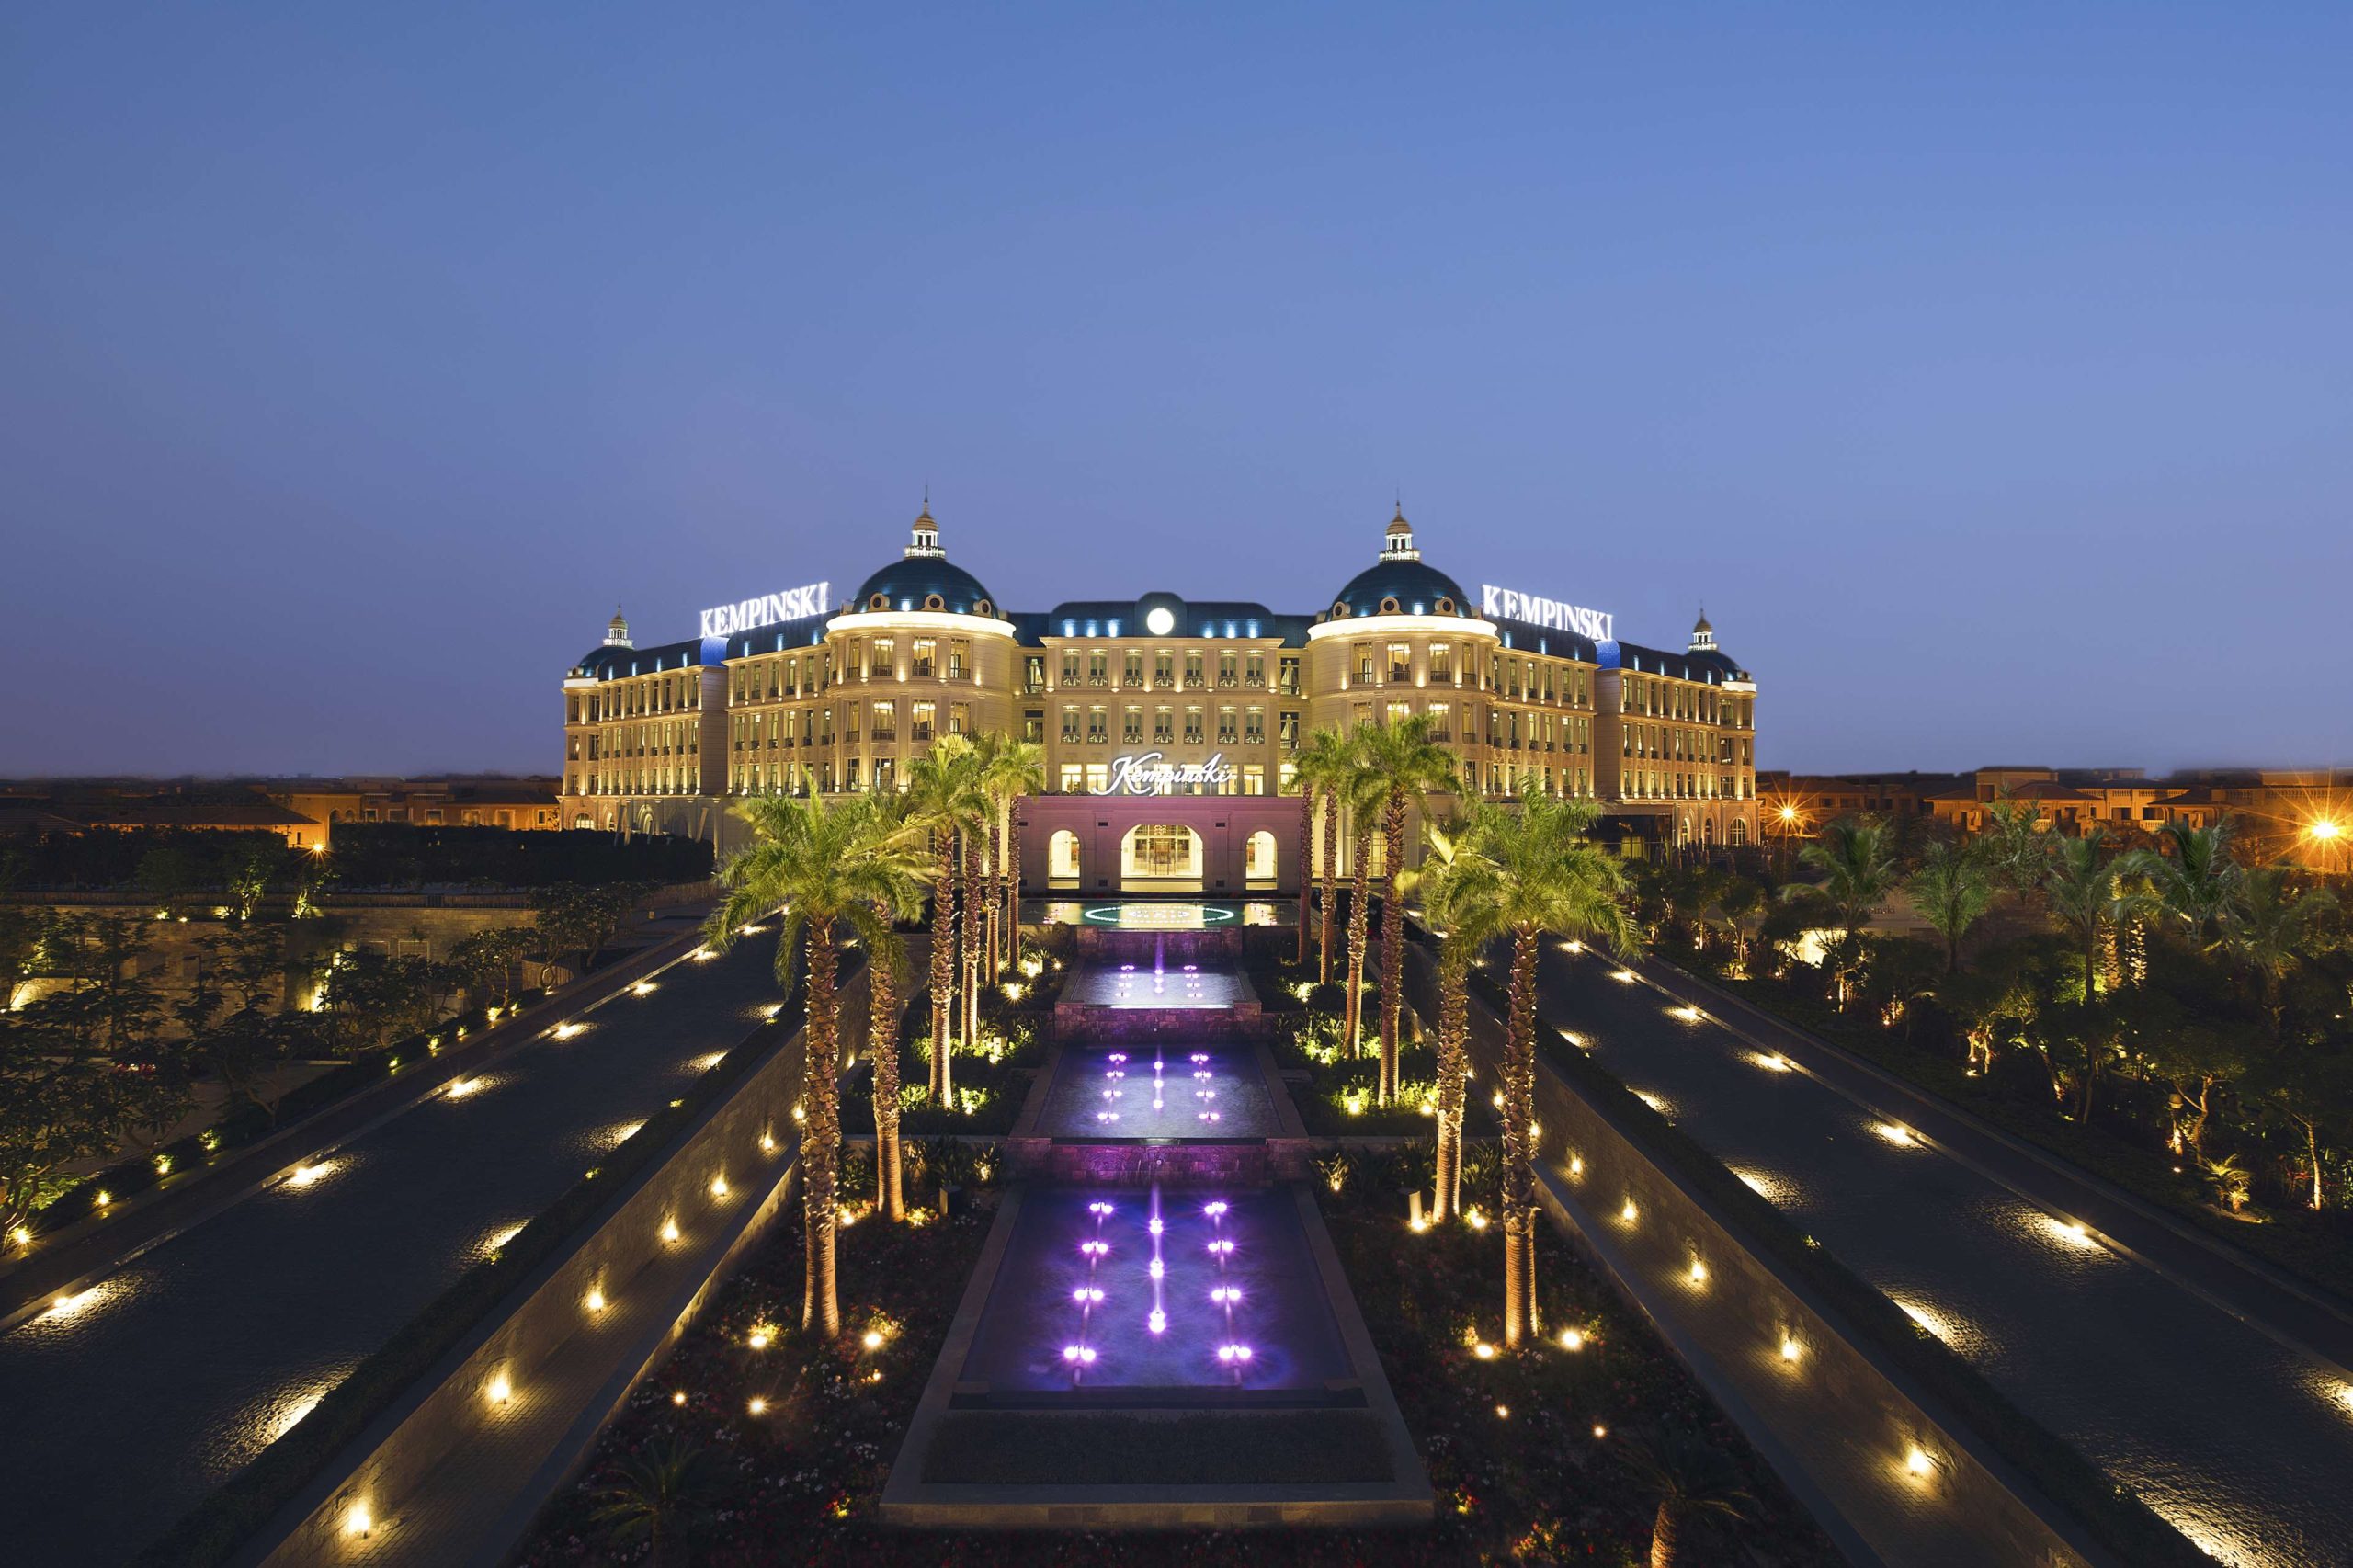 Royal Maxim Palace Kempinski in Cairo with a grand entrance and elegant architecture